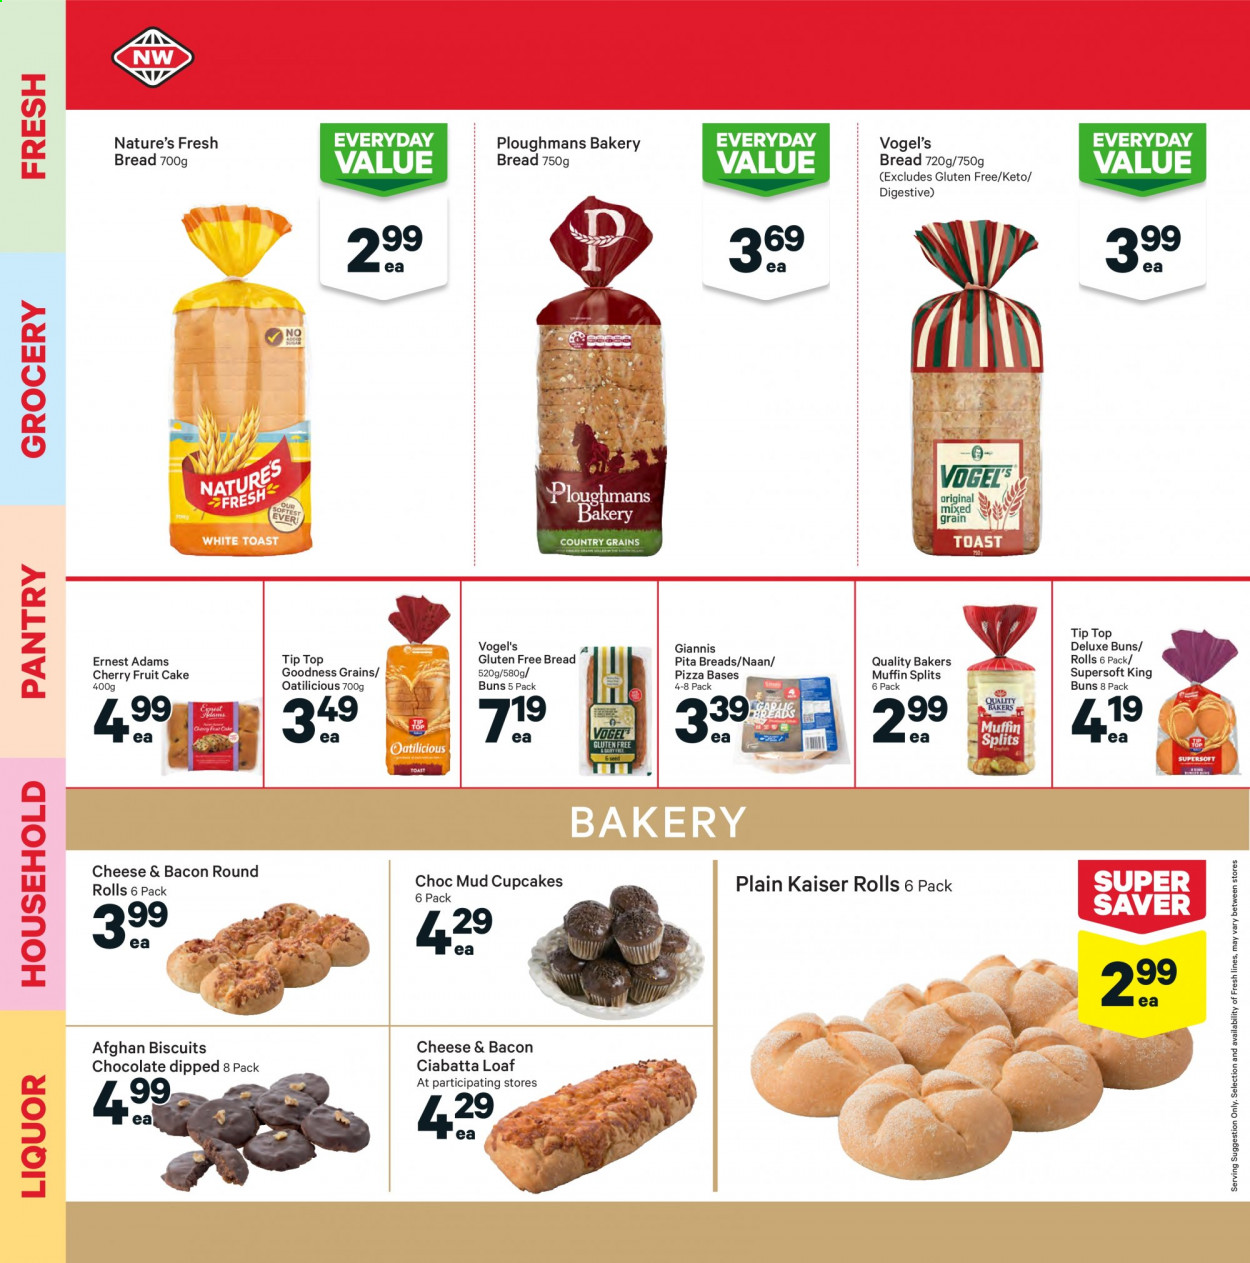 thumbnail - New World mailer - 06.09.2021 - 12.09.2021 - Sales products - bread, ciabatta, pita, cake, Tip Top, buns, cupcake, muffin, cherries, bacon, pizza dough, chocolate, biscuit, Digestive, liquor. Page 8.